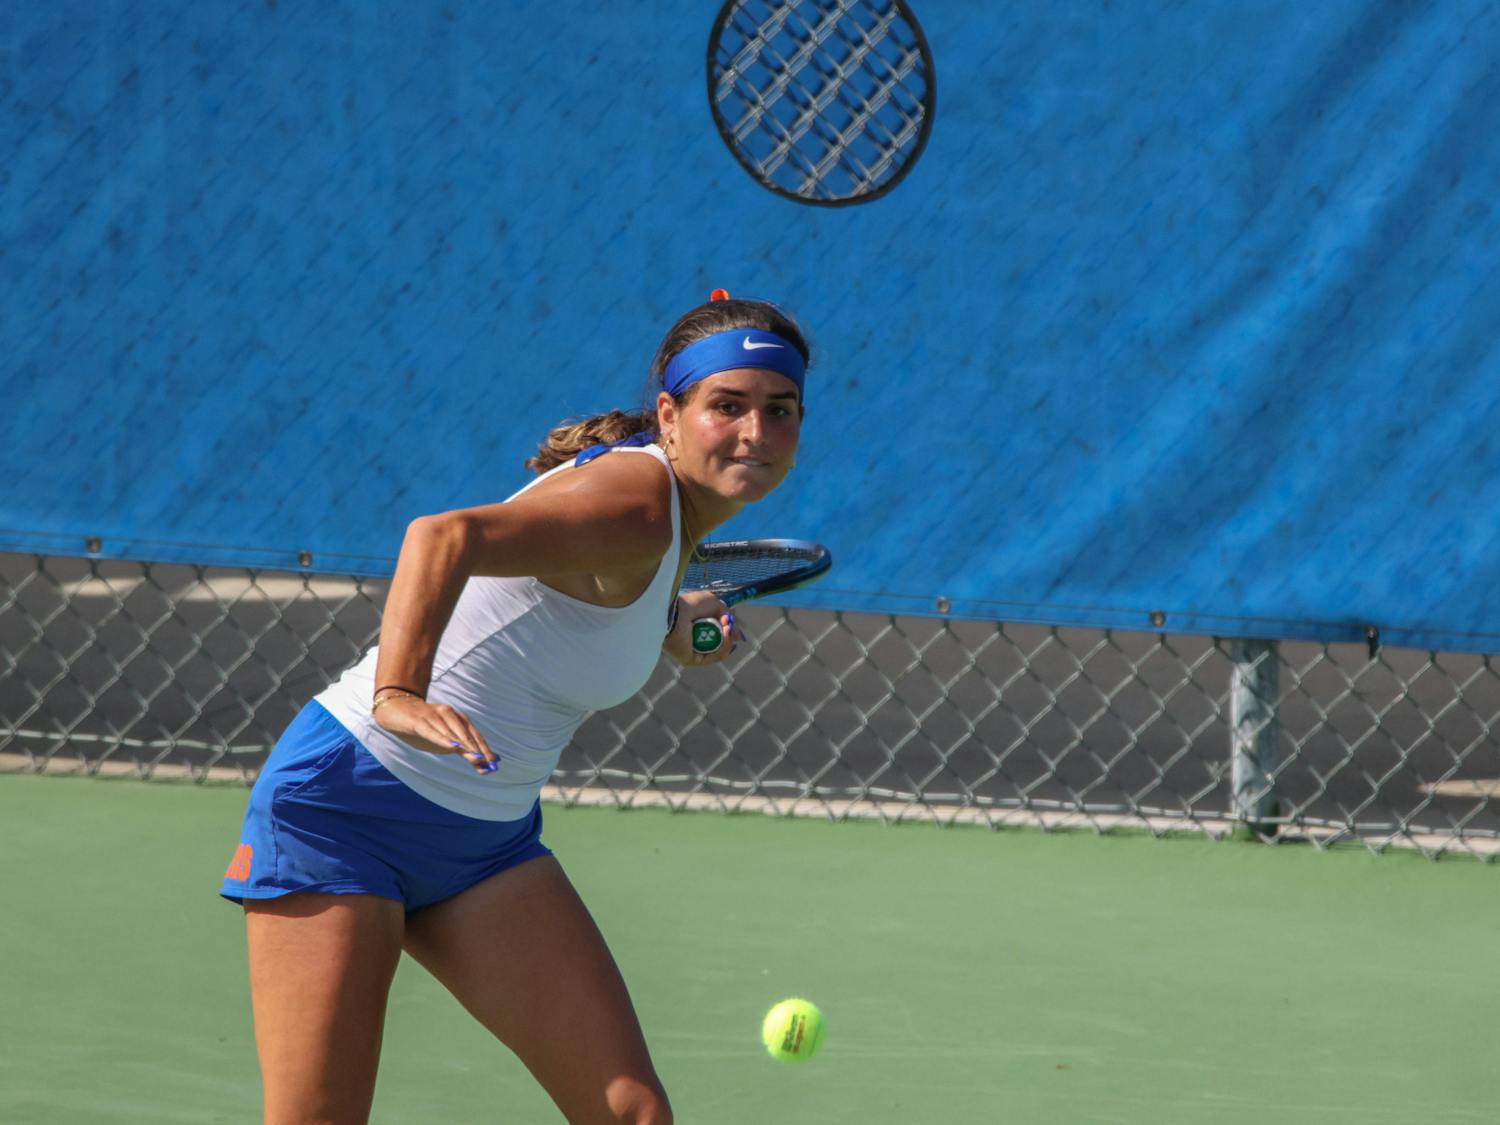 Gators sophomore Emily De Oliveira prepares to hit the ball in a 4-1 victory against the Michigan Wolverines Wednesday, March 22, 2023.